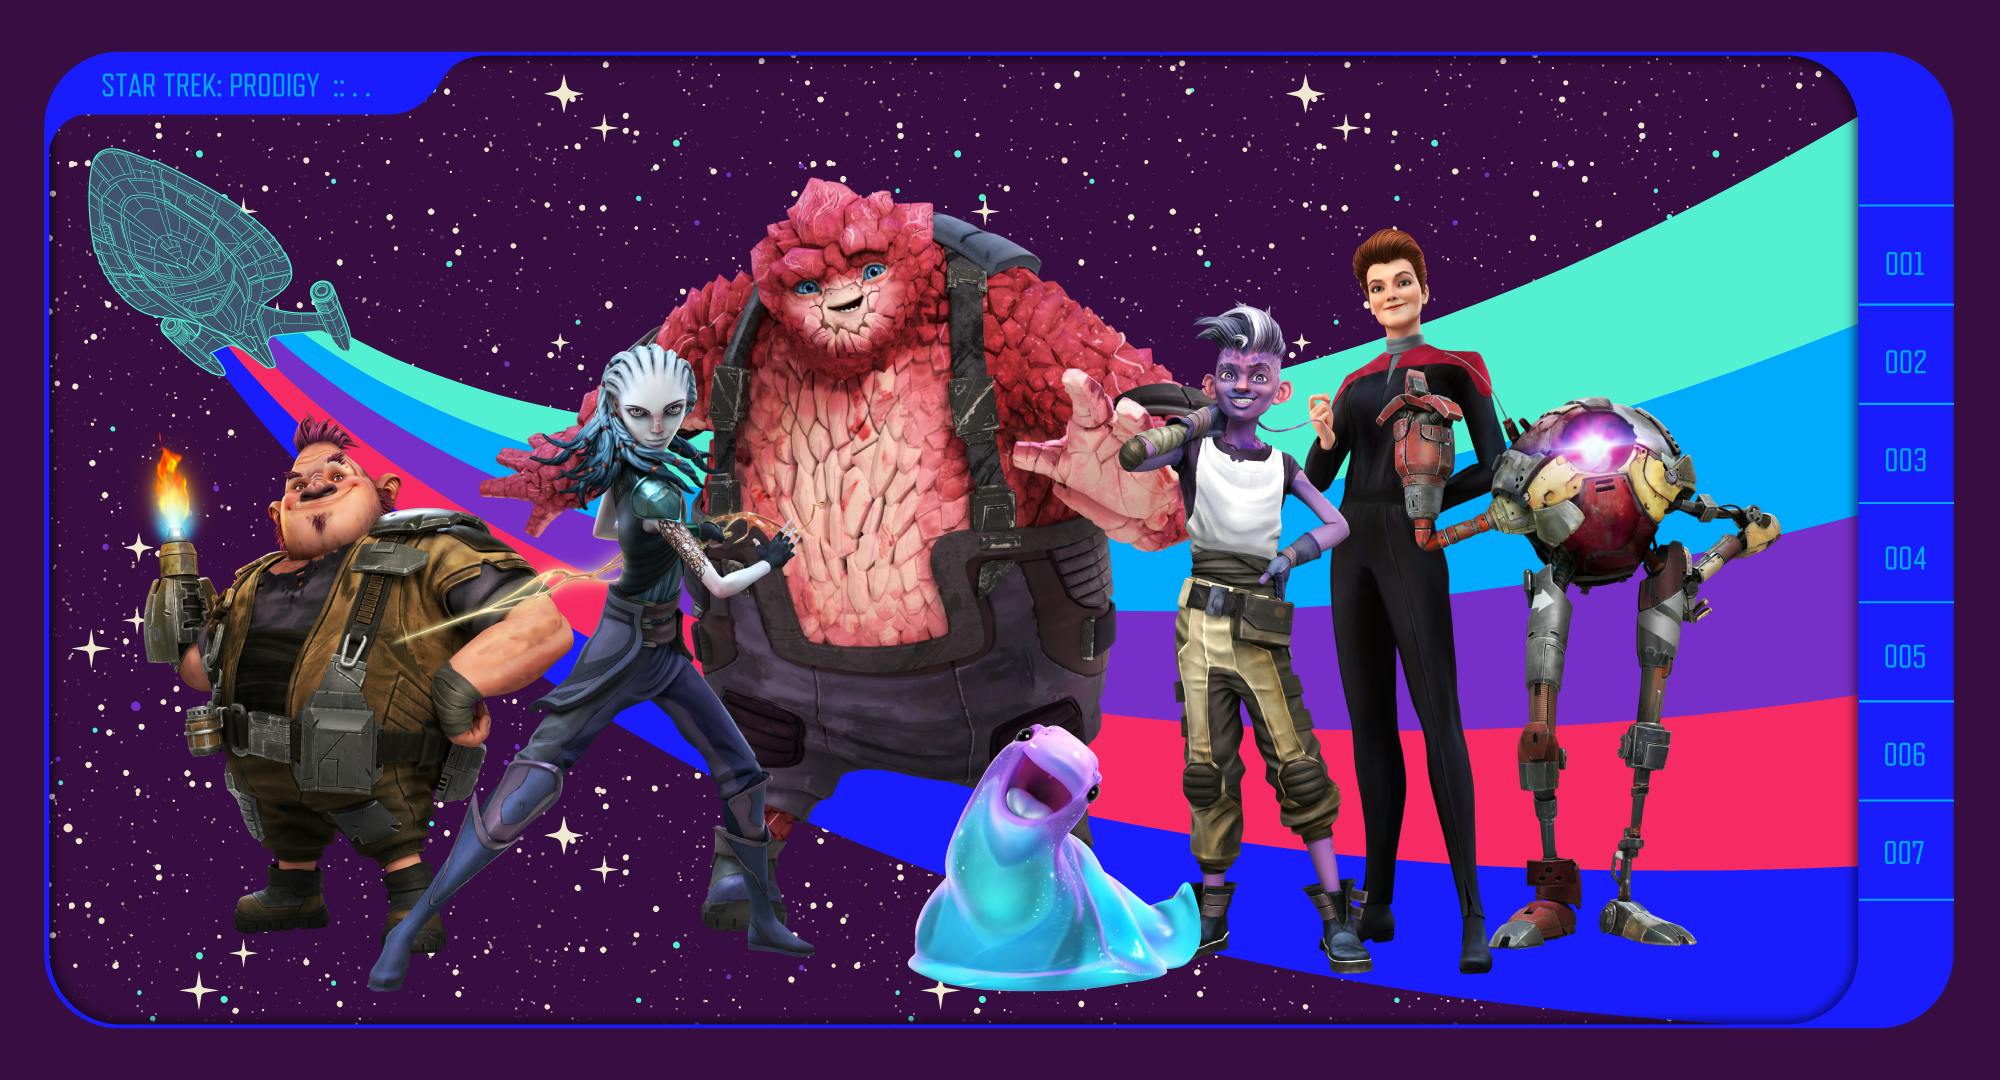 Decorative banner in the style of a trading card featuring the U.S.S. Protostar crew from Star Trek: Prodigy including Rok-Tahk, Dal, Zero, Gwyn, Jankom Pog, Murf, and Hologram Janeway